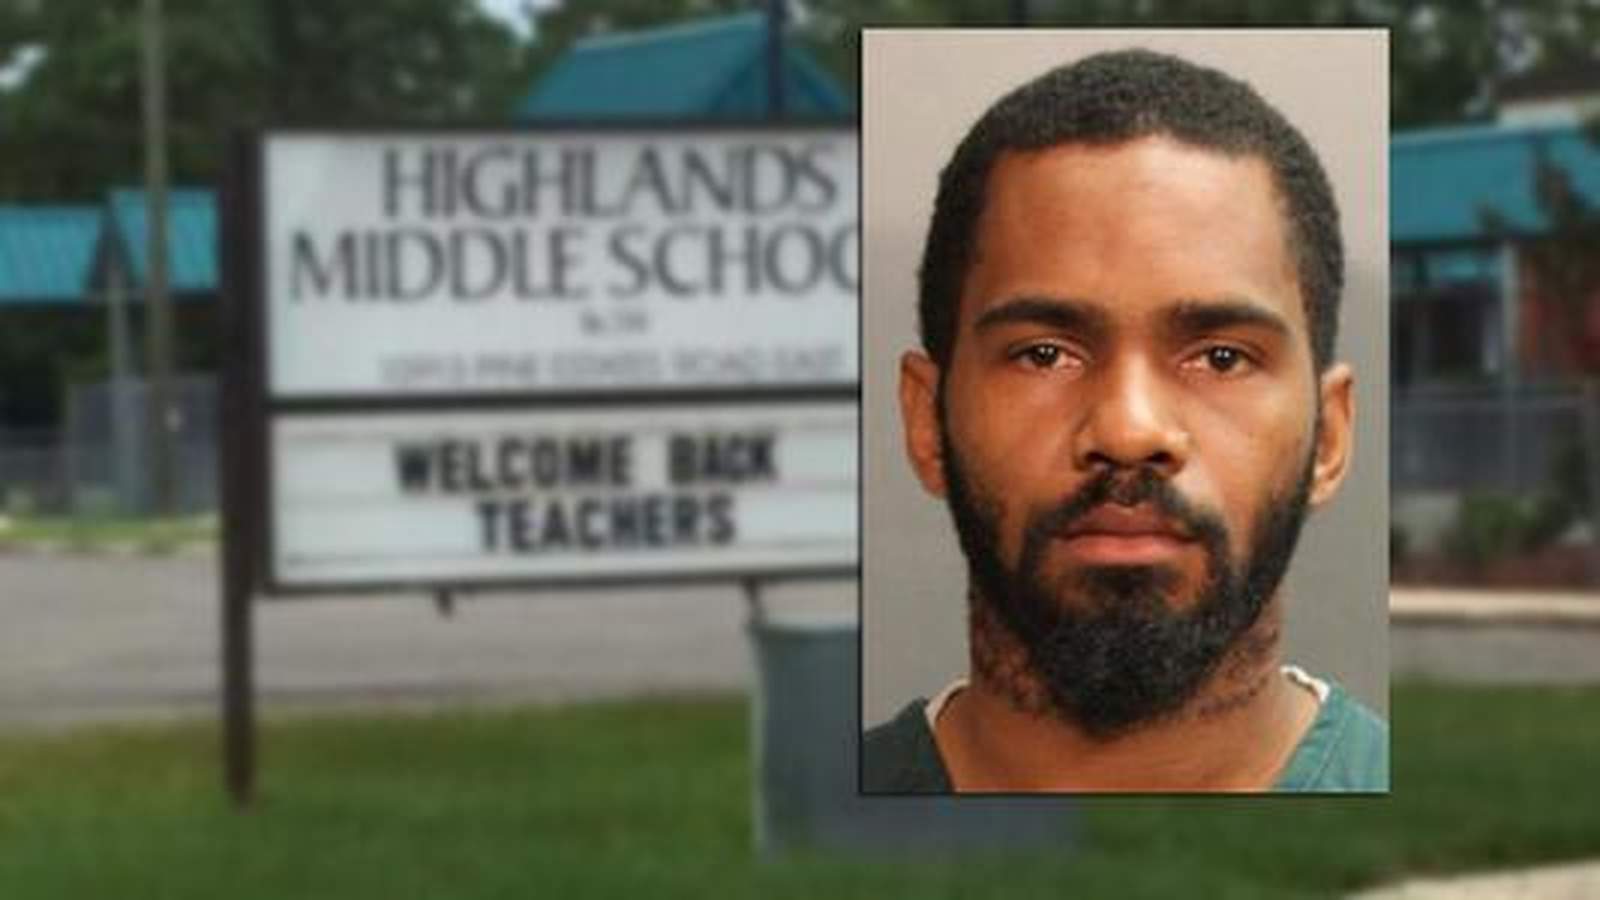 School security guard accused of child abuse involving student